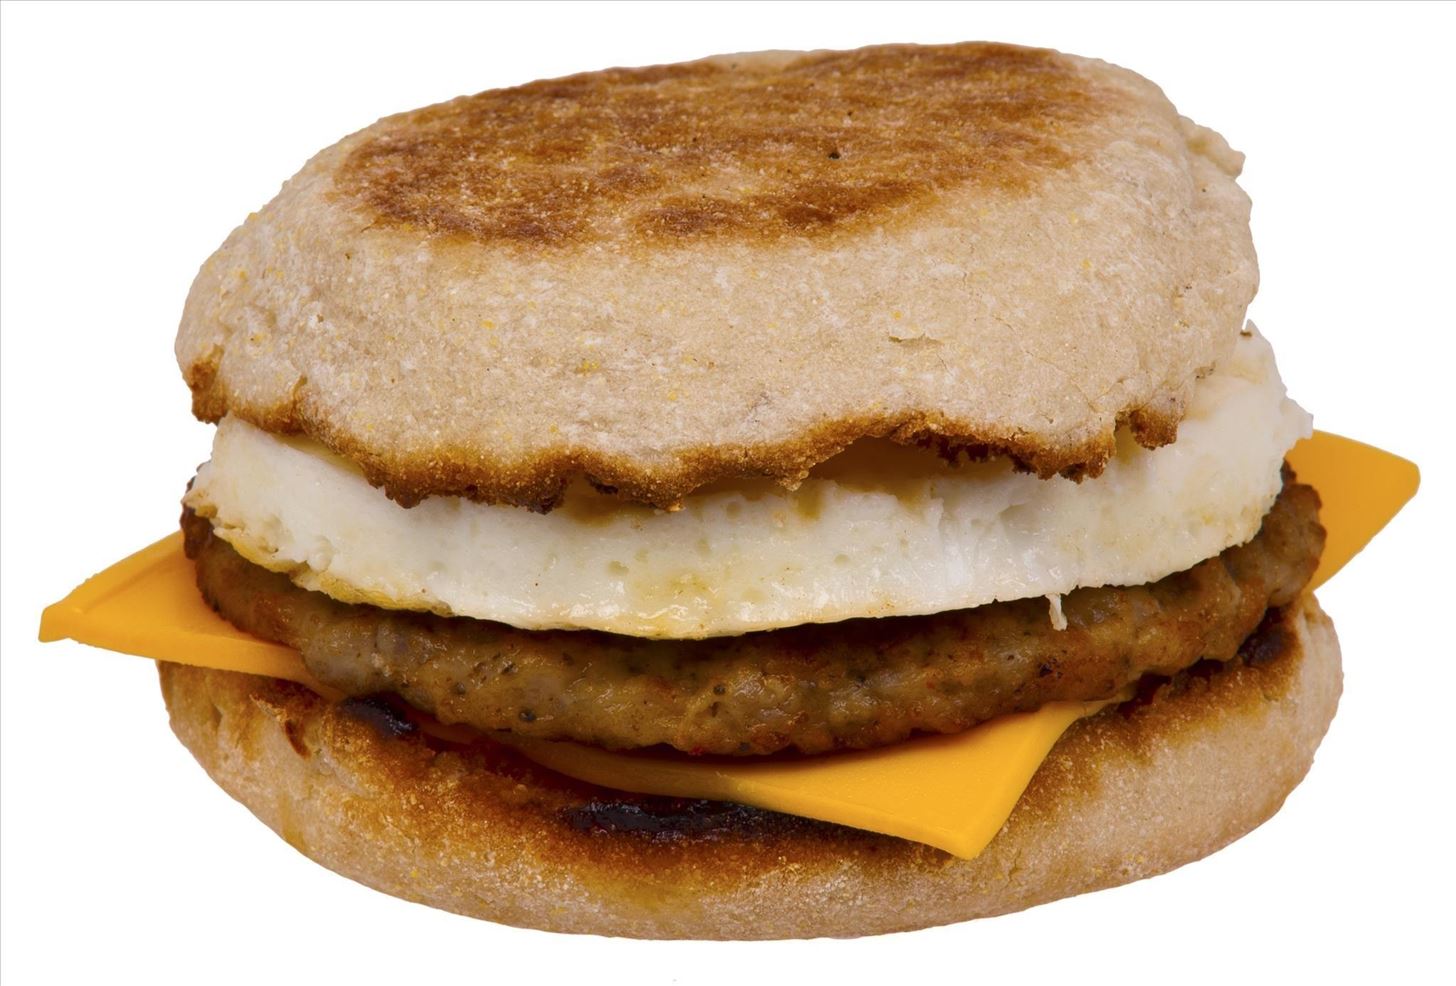 Screw McDonald's—Make Your Own Big Macs, Egg McMuffins, & Other Famous Mickey D's Meals at Home!